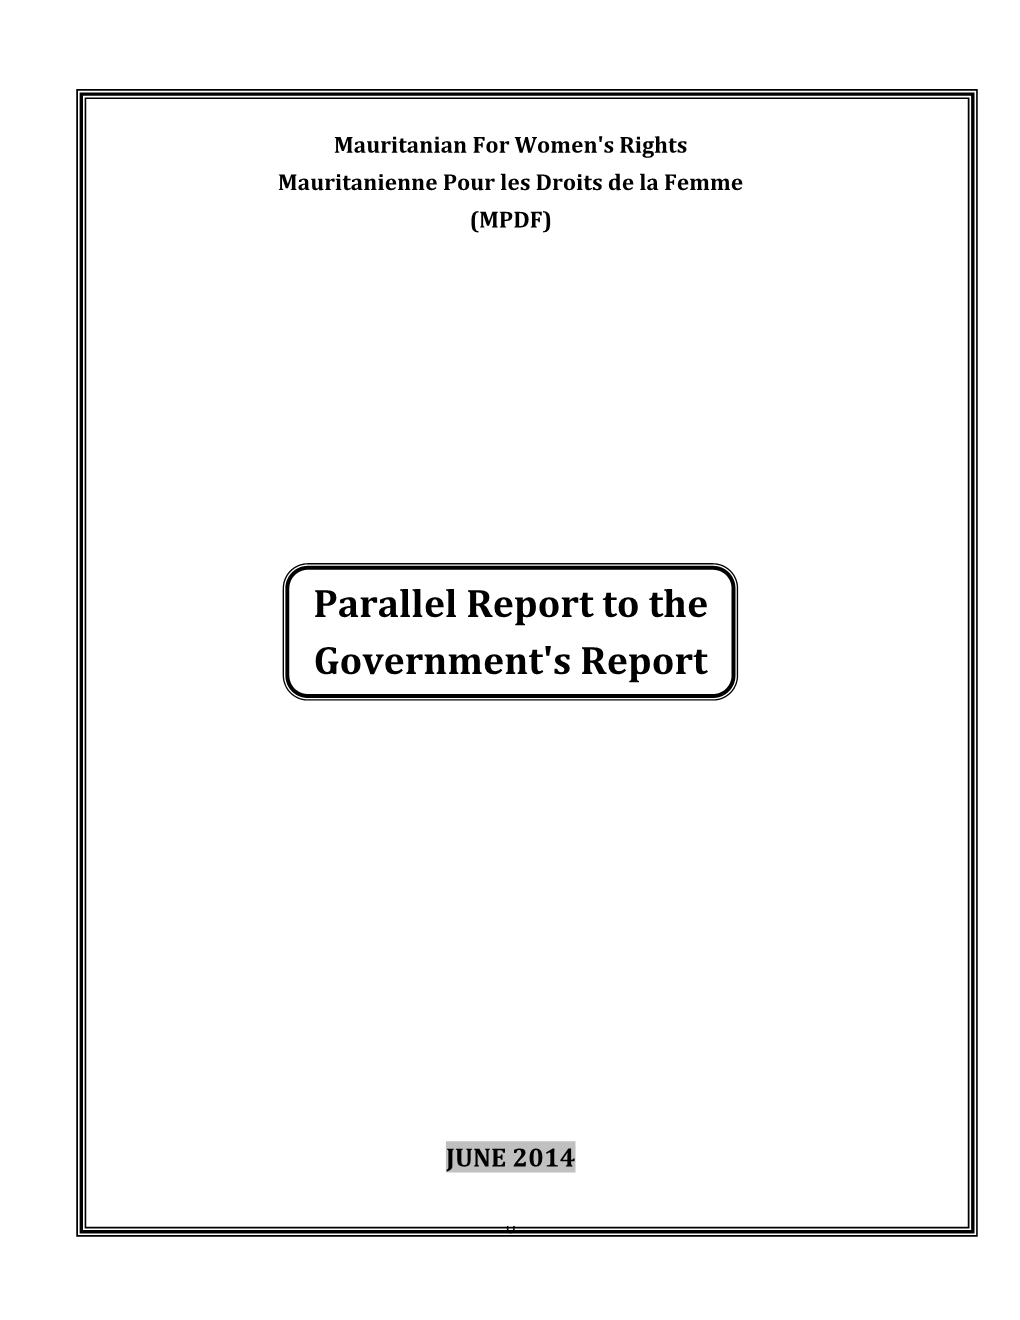 Parallel Report to the Government's Report